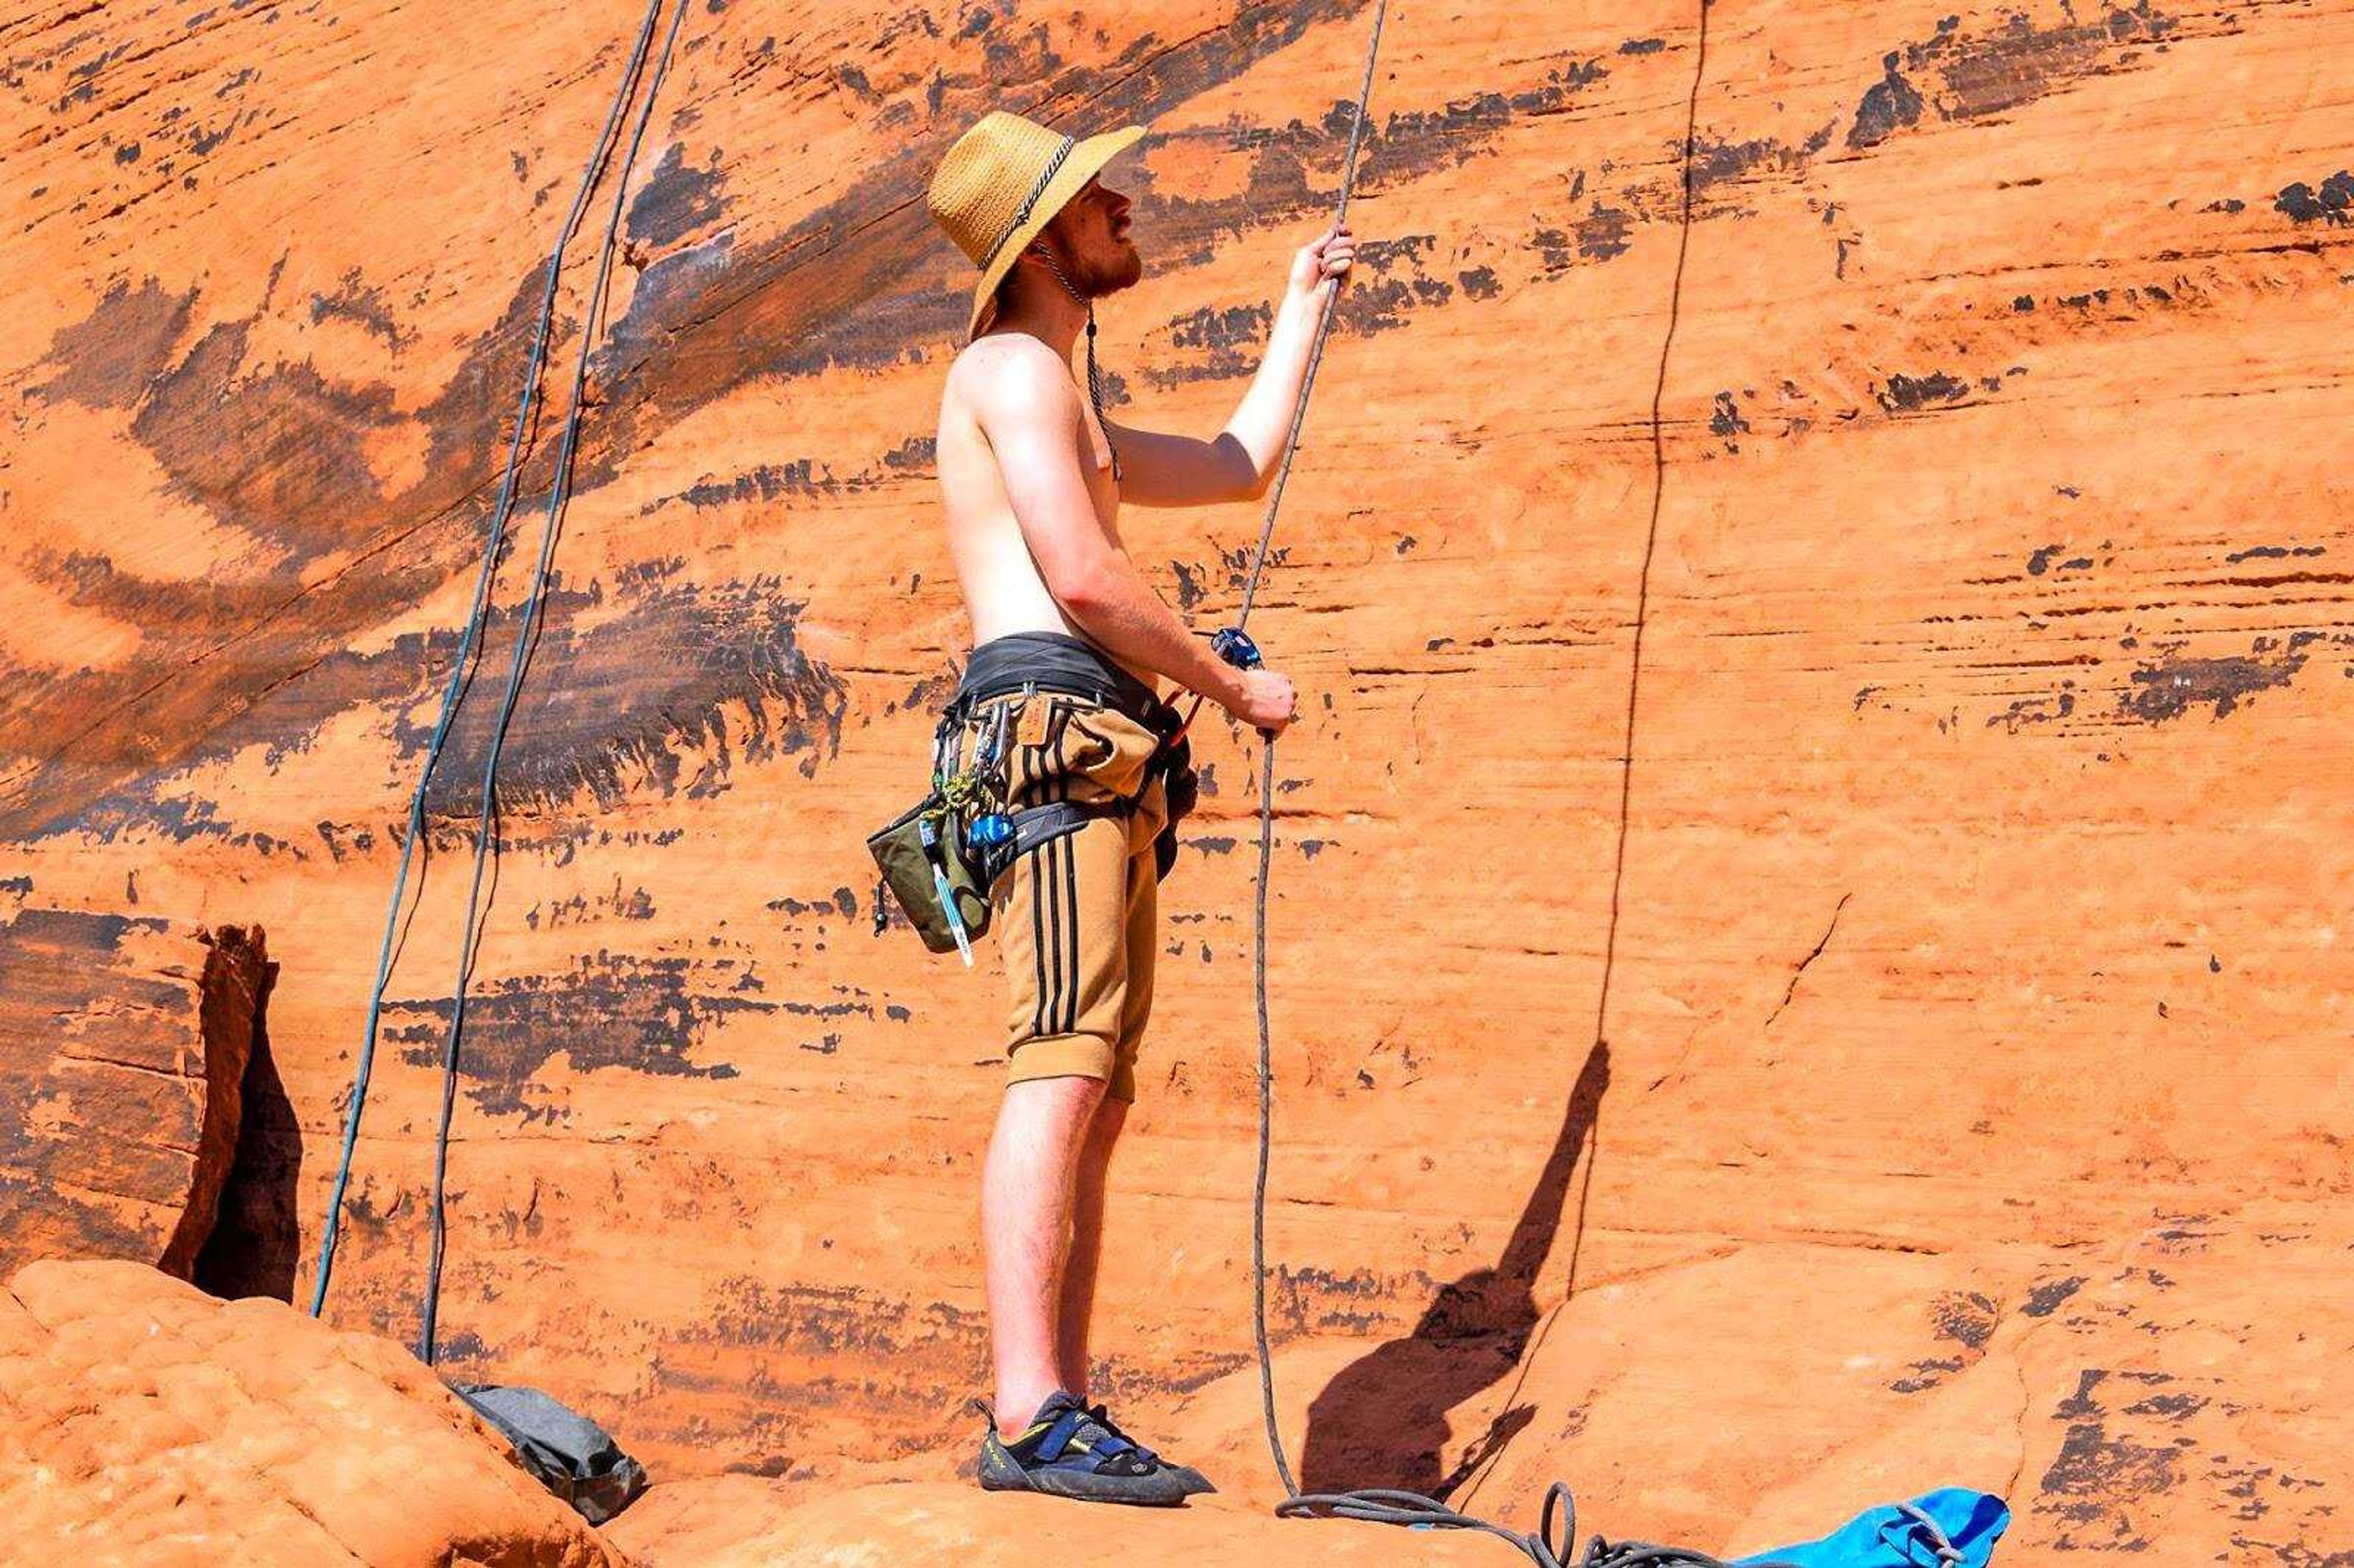 Club President John Bowdle belaying a club member at Red Rocks Conservation Area, Nevada during spring break 2017.